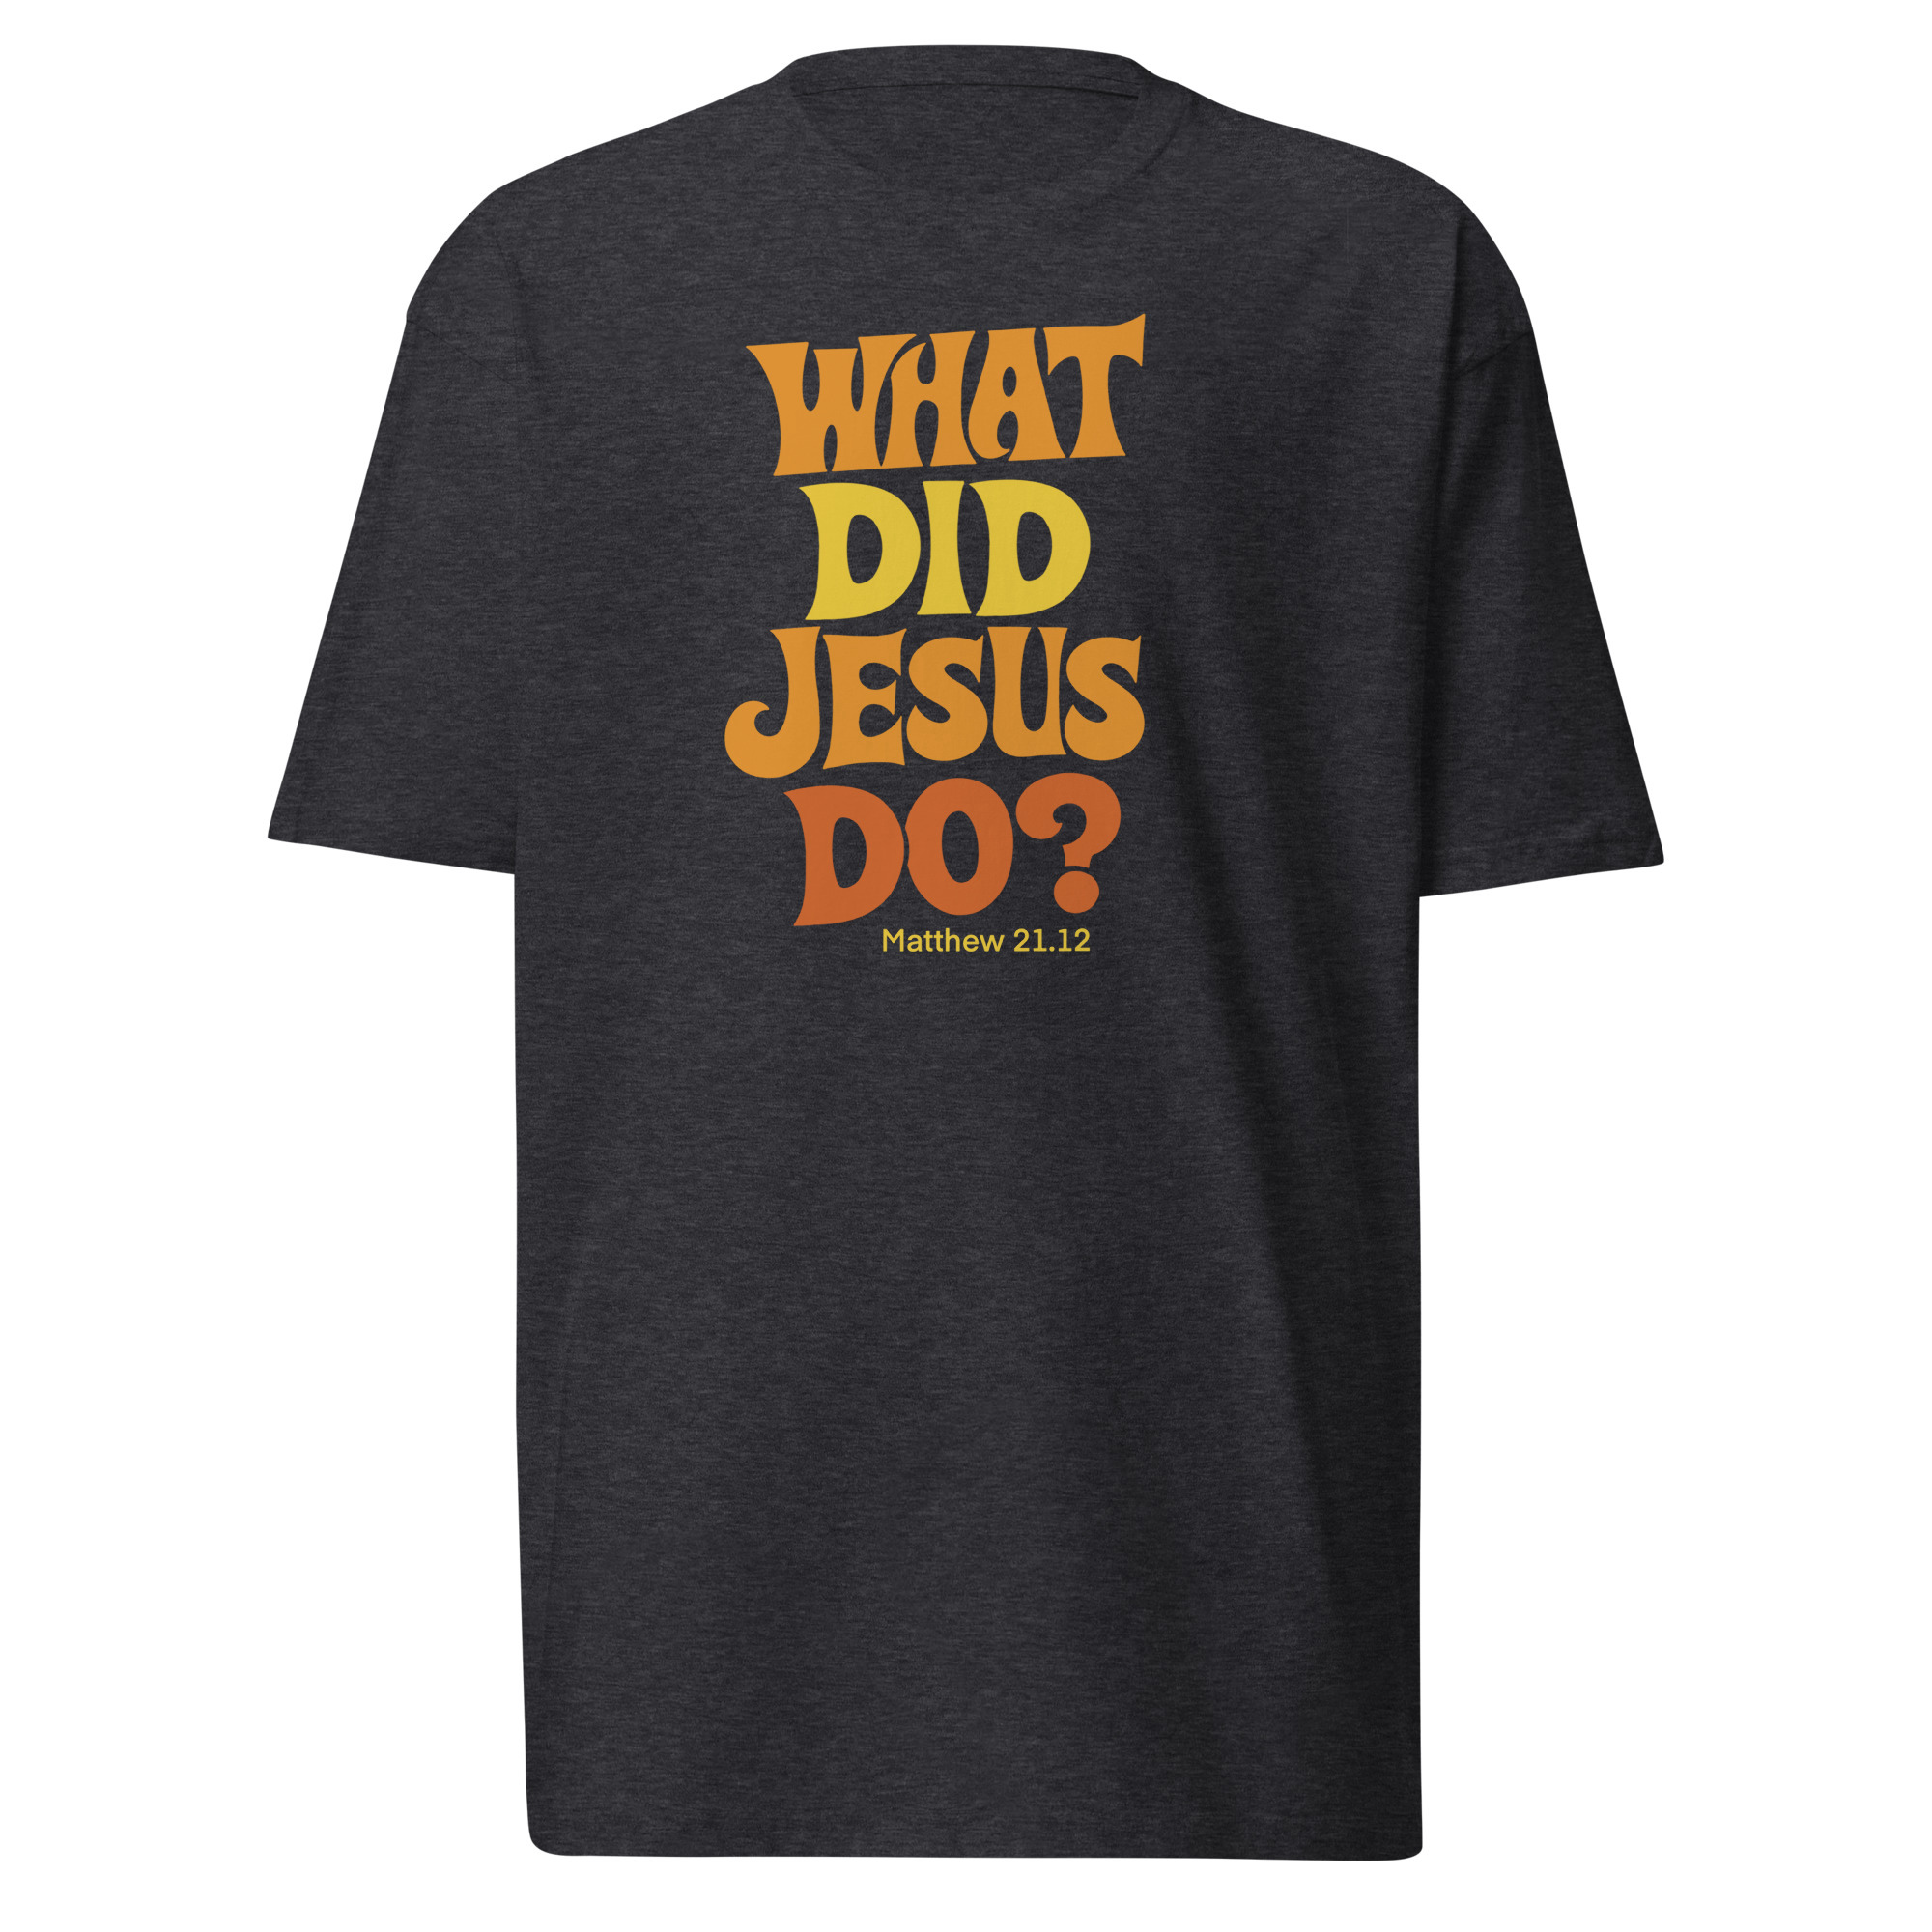 What Did Jesus Do? T-Shirt - Charcoal Heather / L